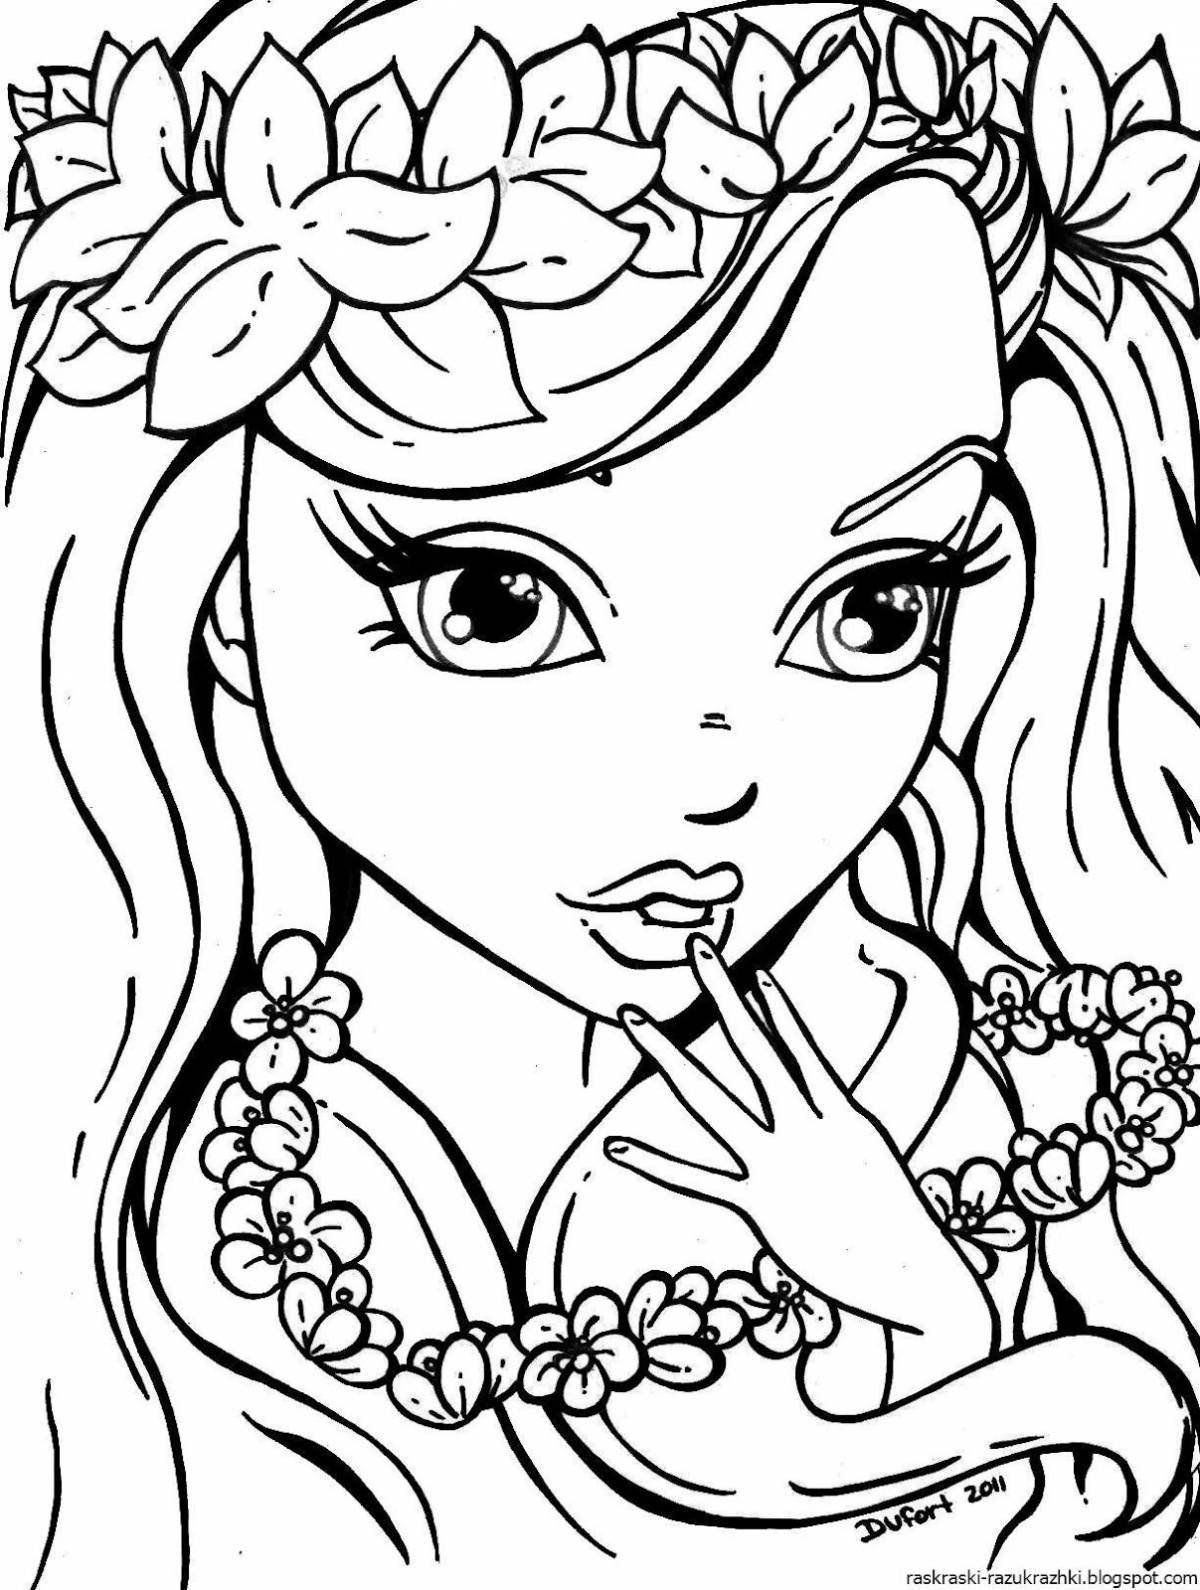 Awesome beautiful children's coloring book